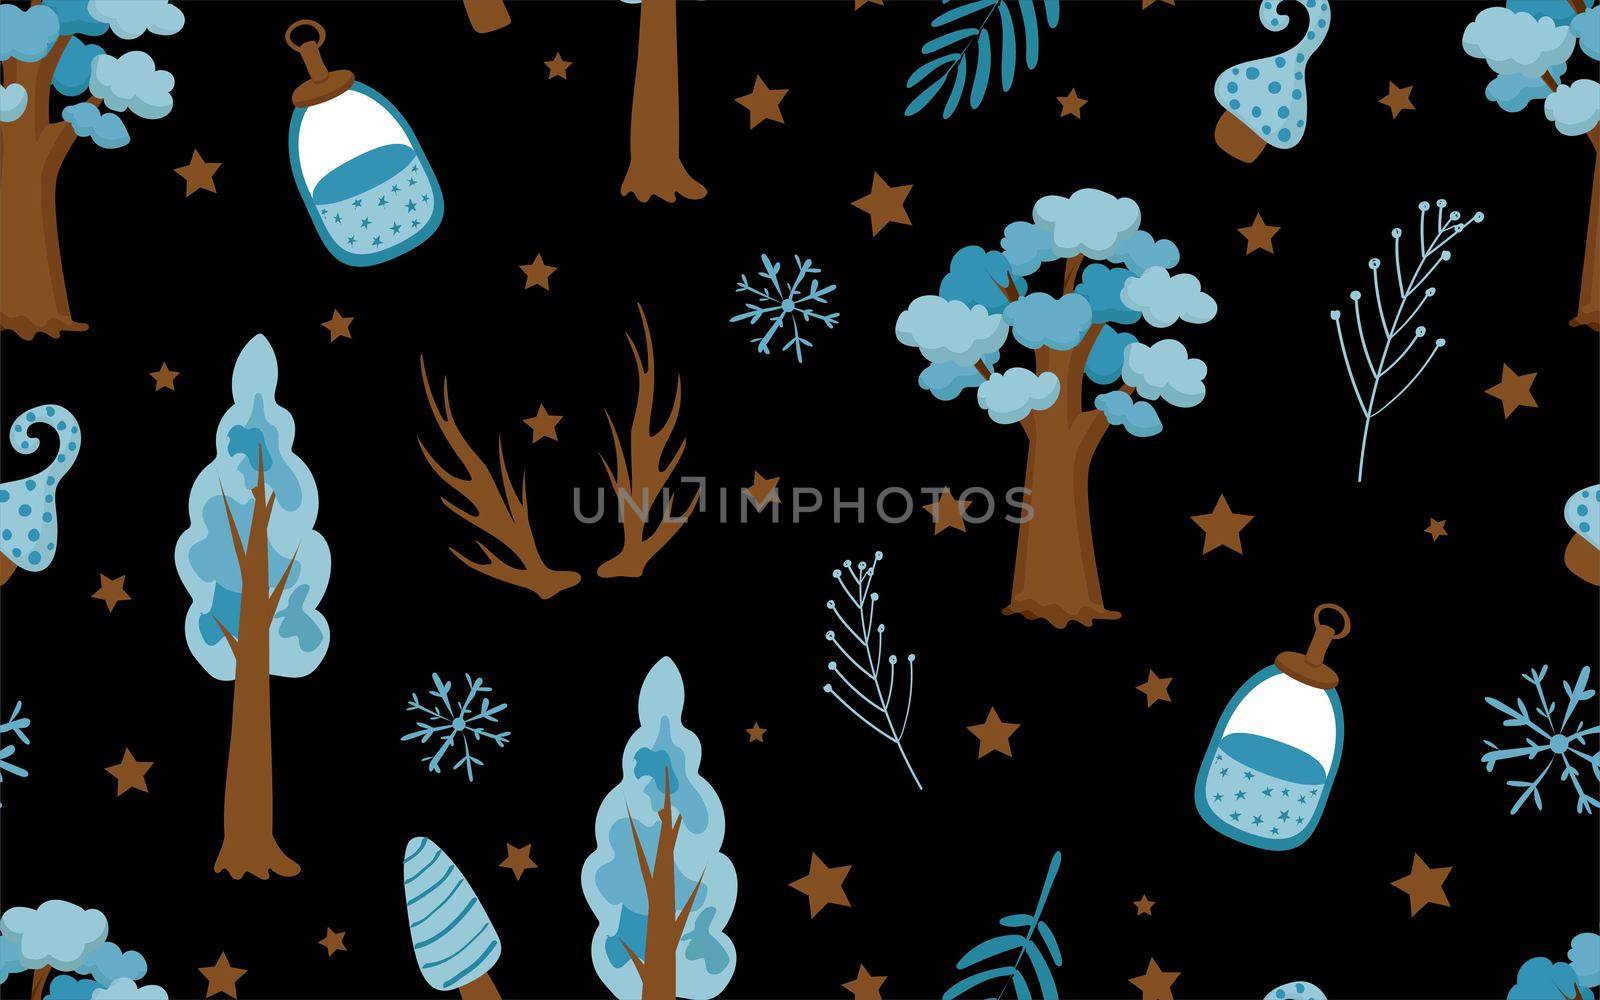 Cute fashion pattern in the northern style. Blue tone. Tree, deer horns and leaves on a white background. Children's textiles.